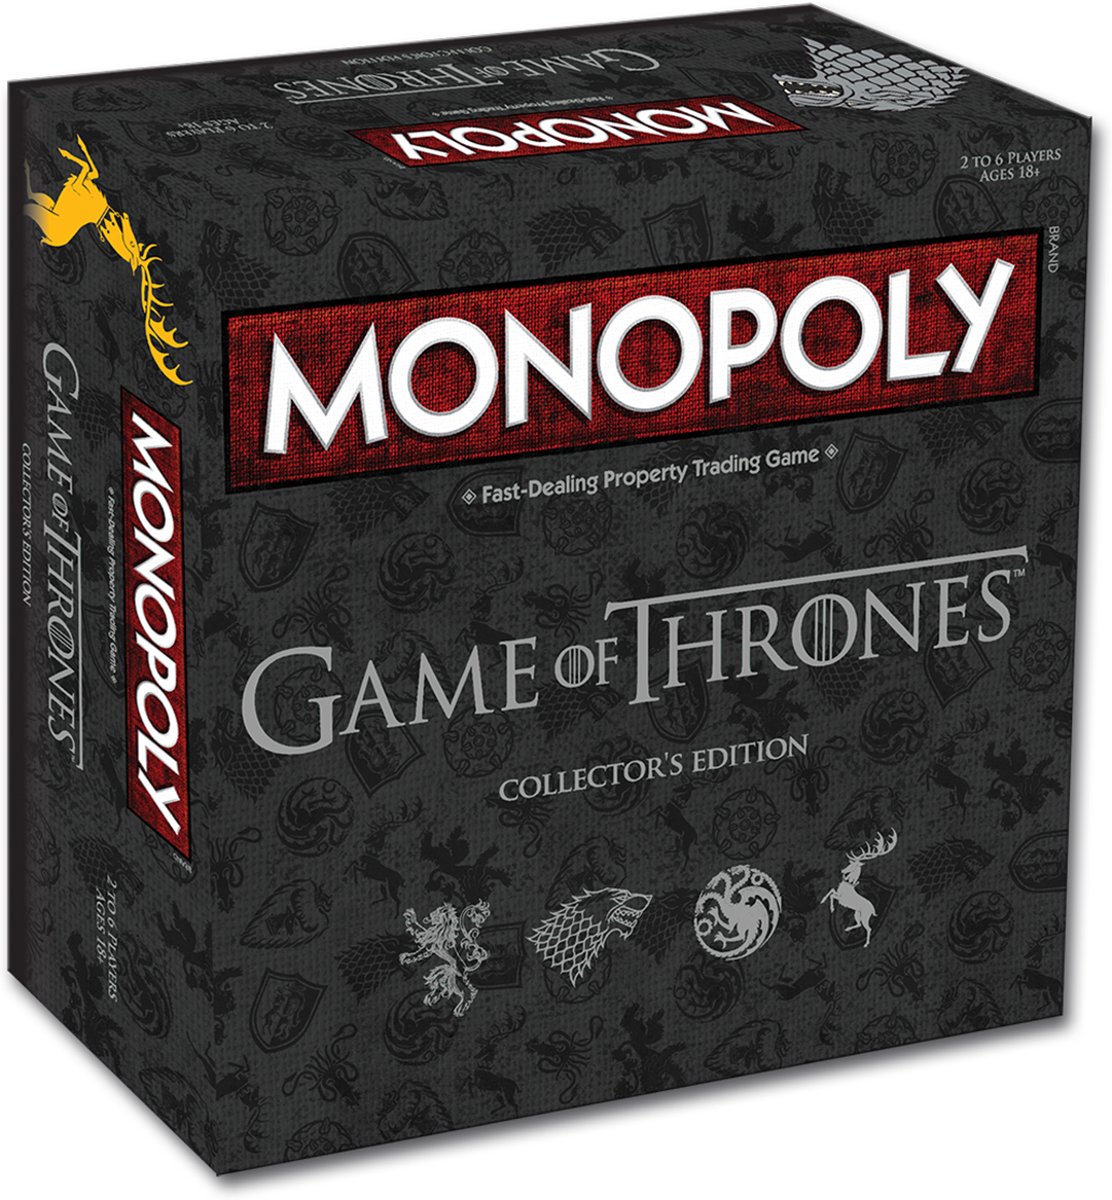 Monopoly Game of Thrones (Collector's Edition)